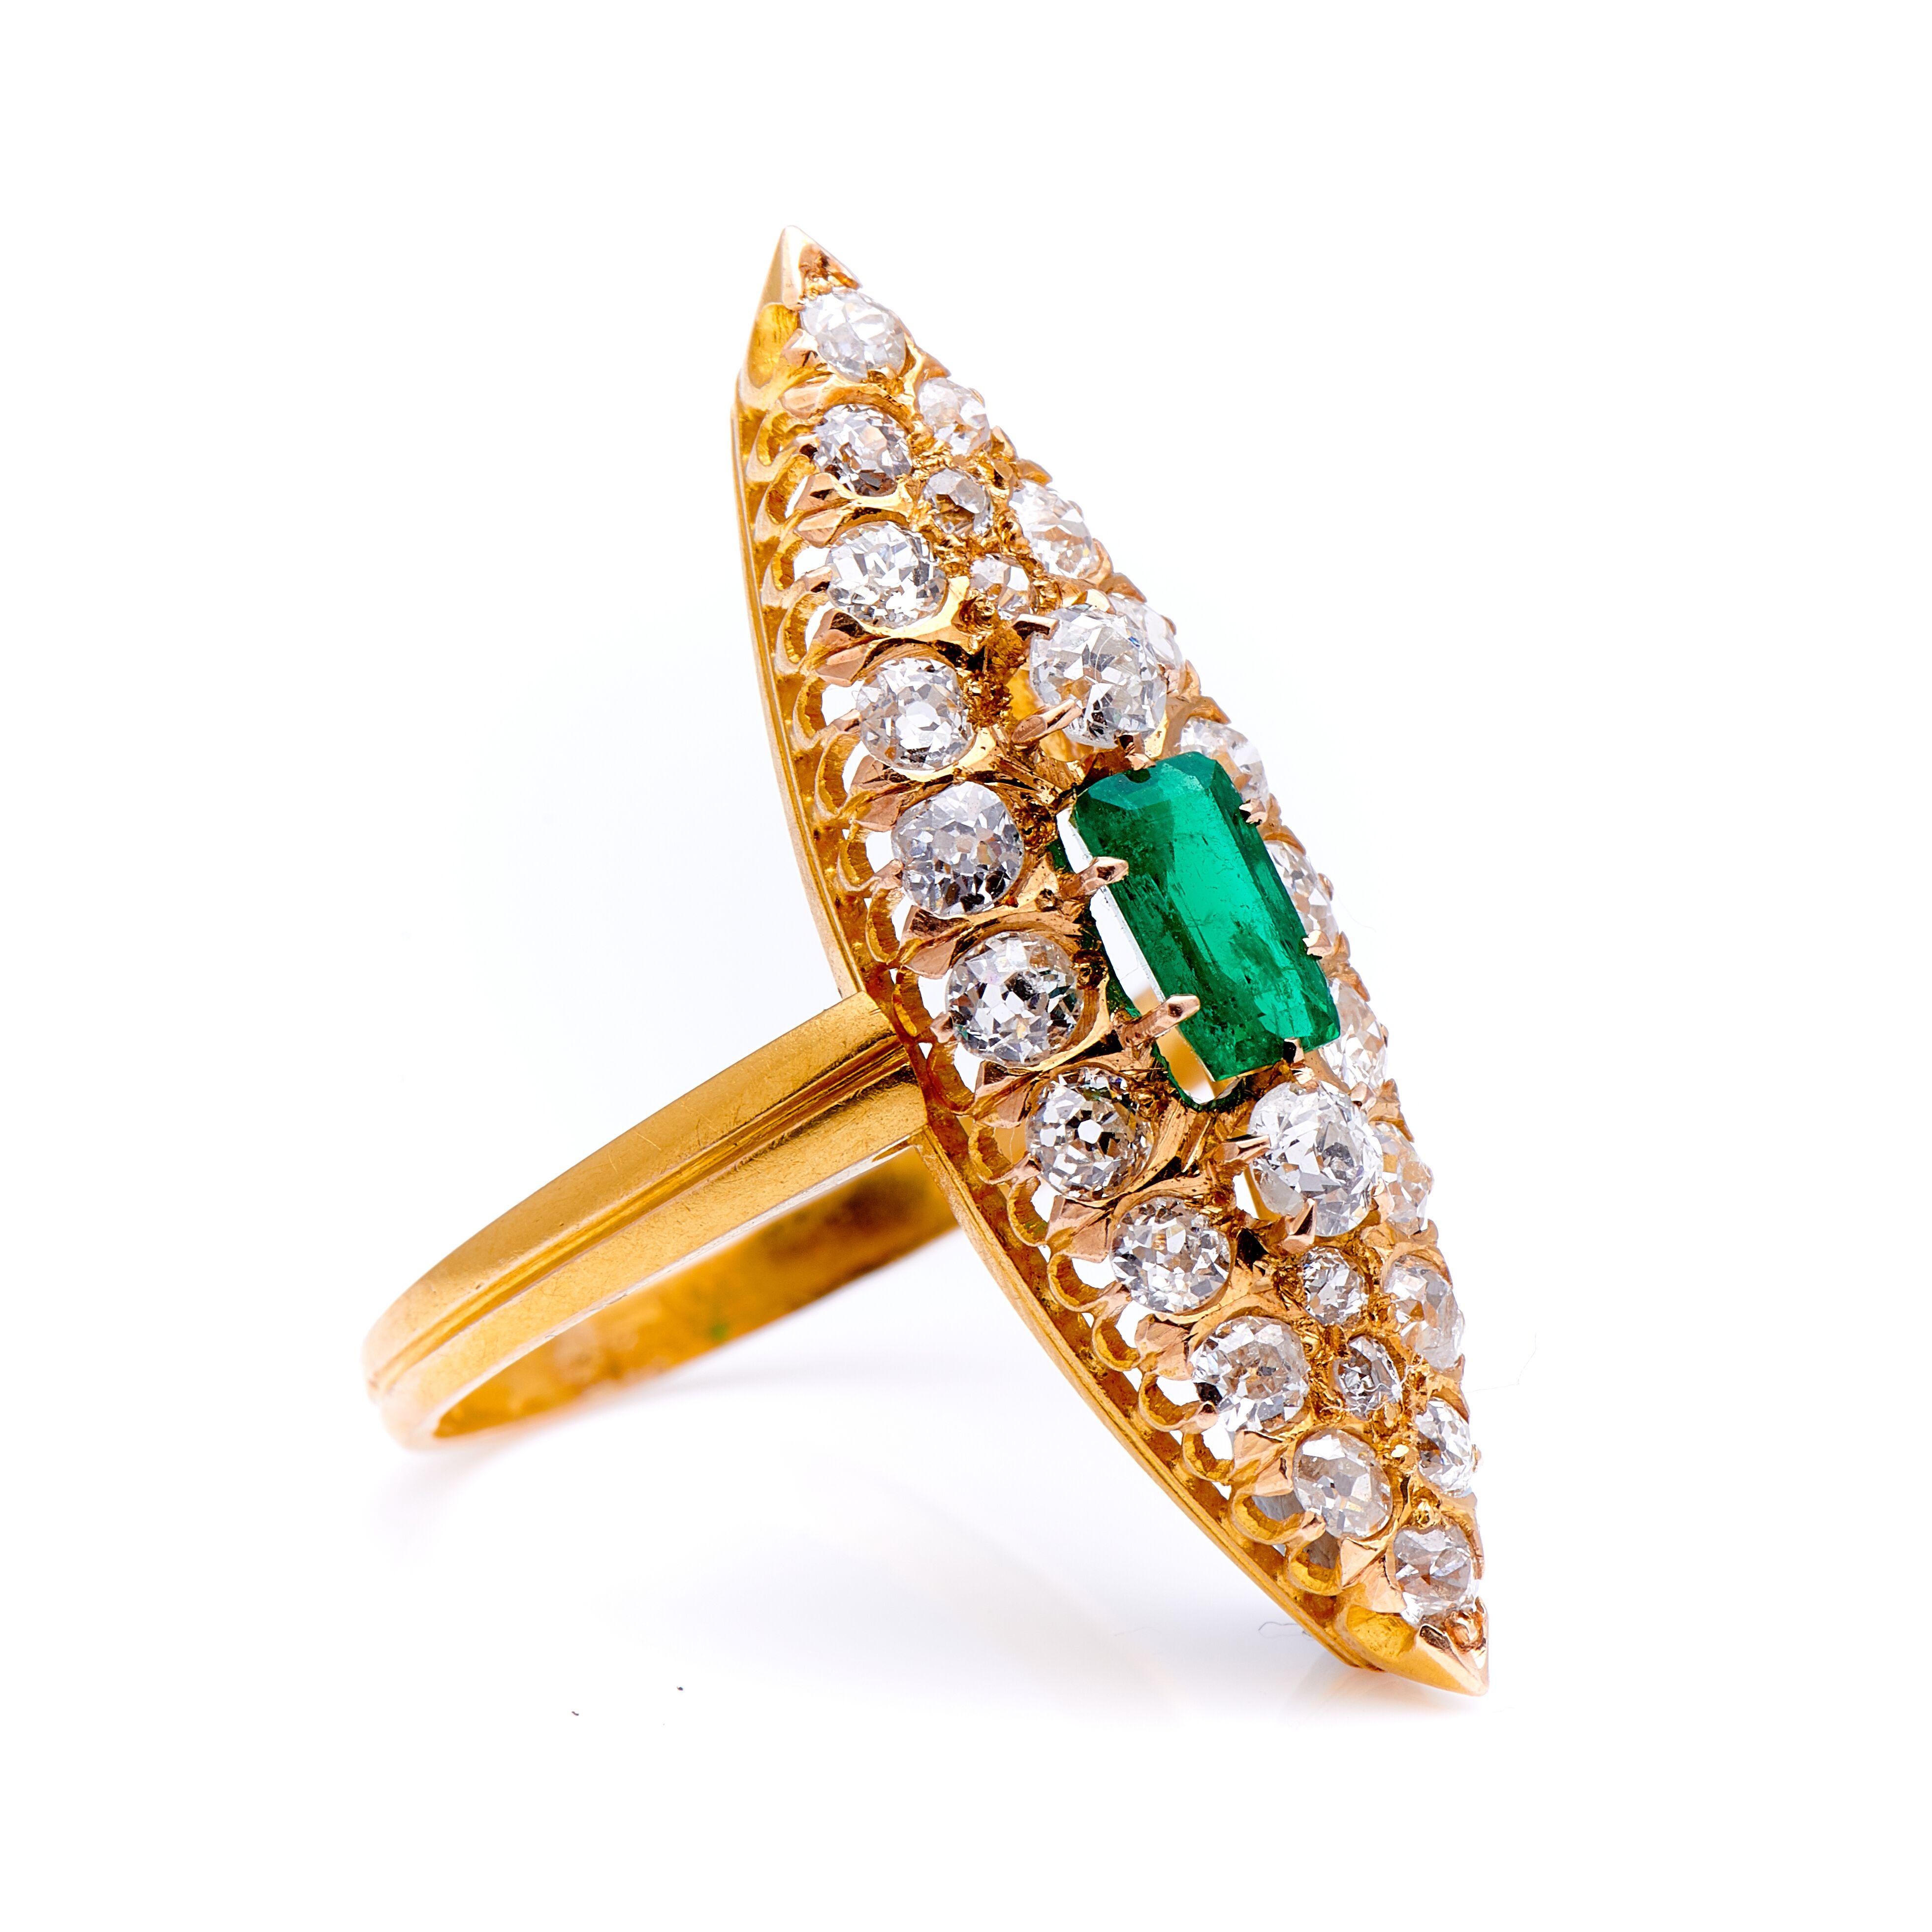 Art Deco, emerald and diamond cluster ring, circa 1920. Set to centre a deep green emerald-cut emerald further set with beautiful old-cut diamonds in a marquise shape cluster. The emerald is a fresh vivid colour with very good saturation, it’s not